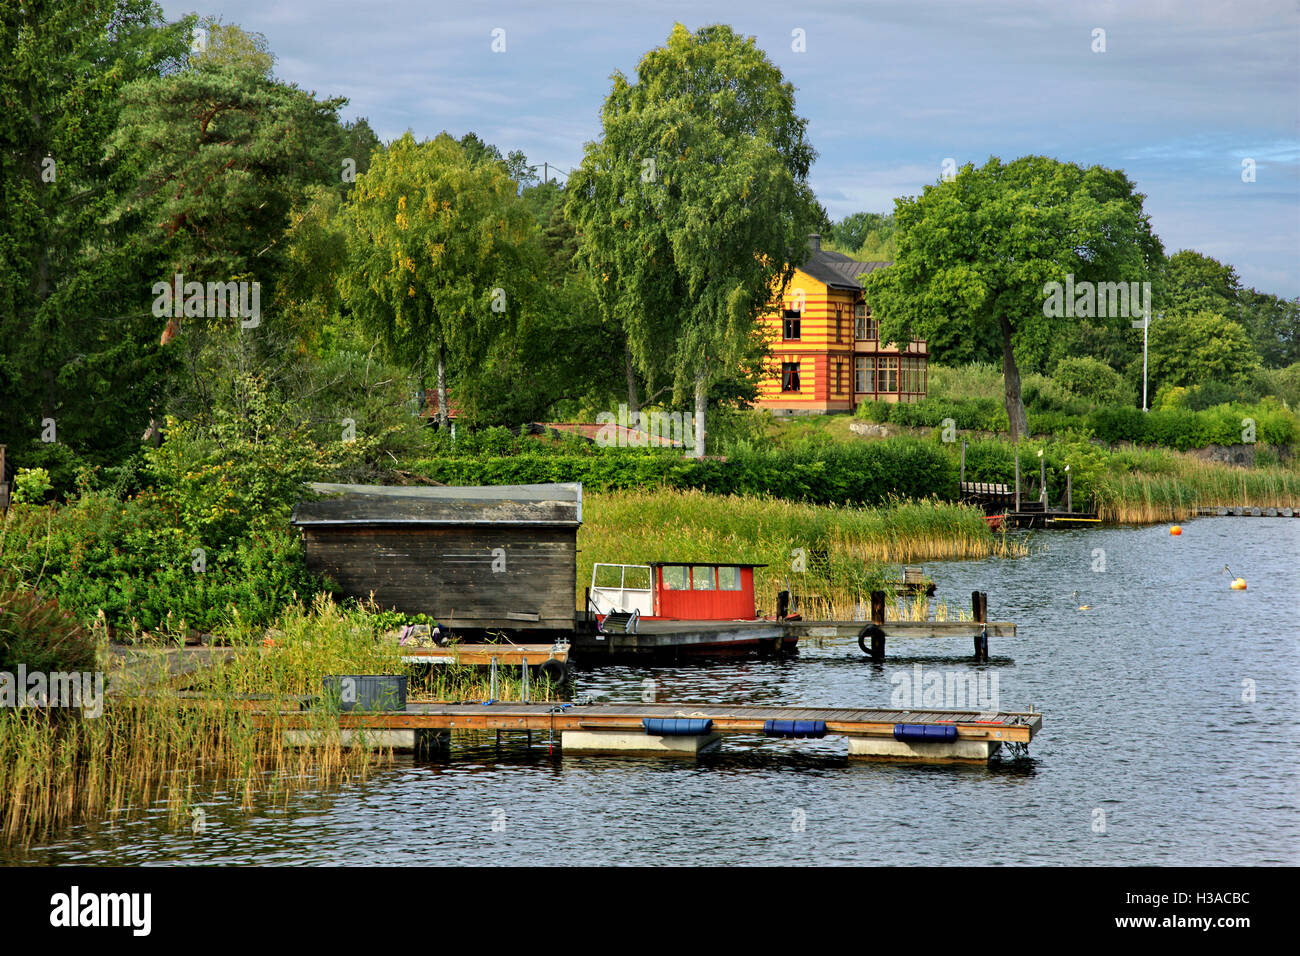 Short stop to Kungshattan during a daily cruise to Drottningholm palace and lake Malaren from Stockholm, Sweden. Stock Photo